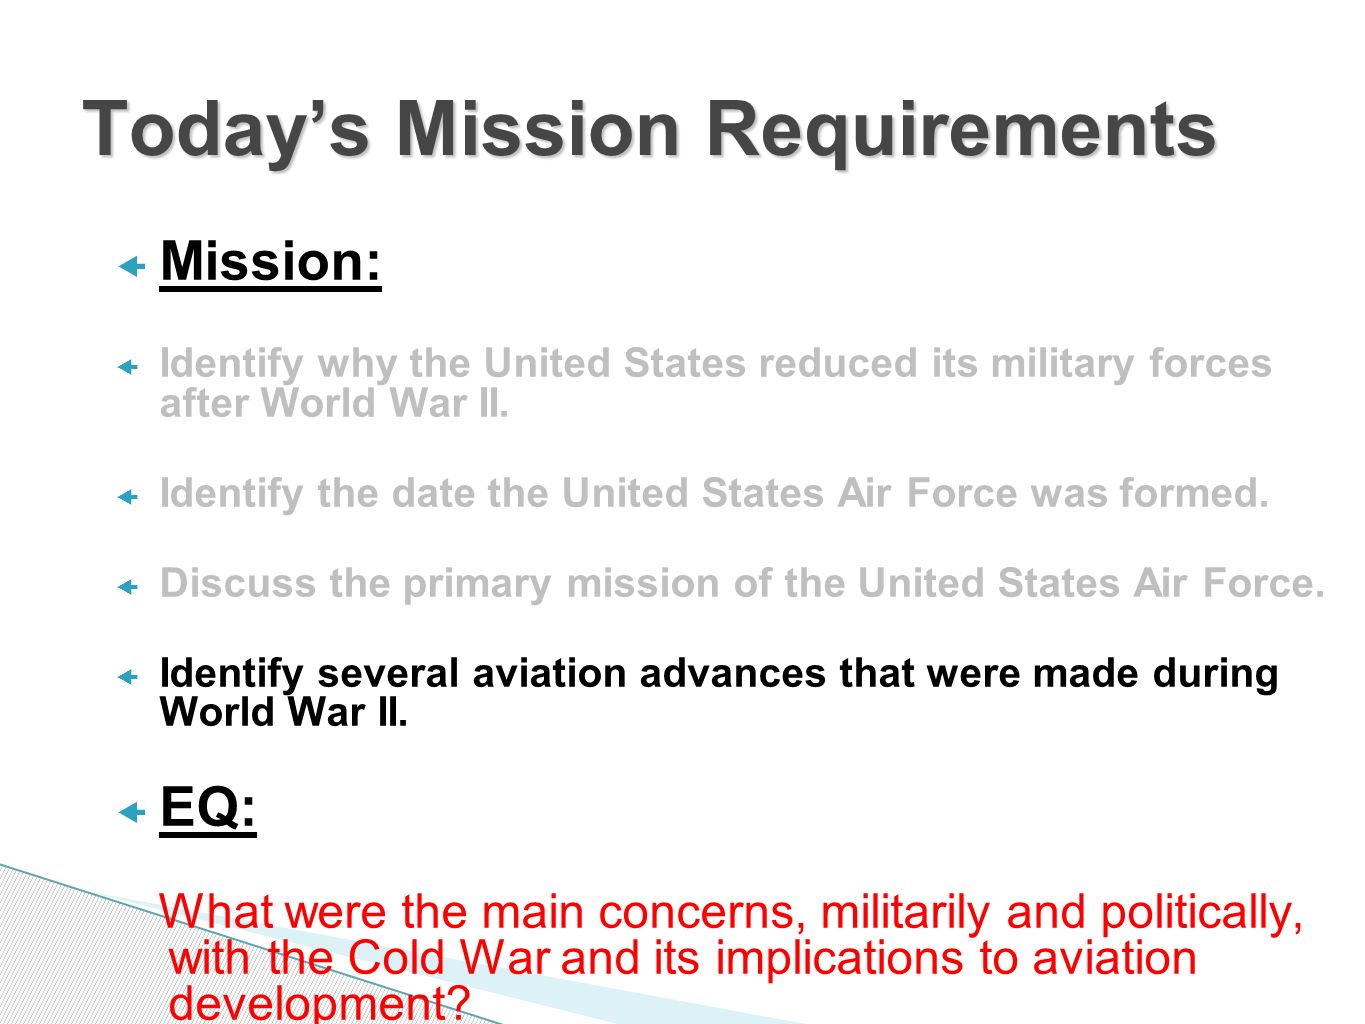  Mission:  Identify why the United States reduced its military forces after World War II.